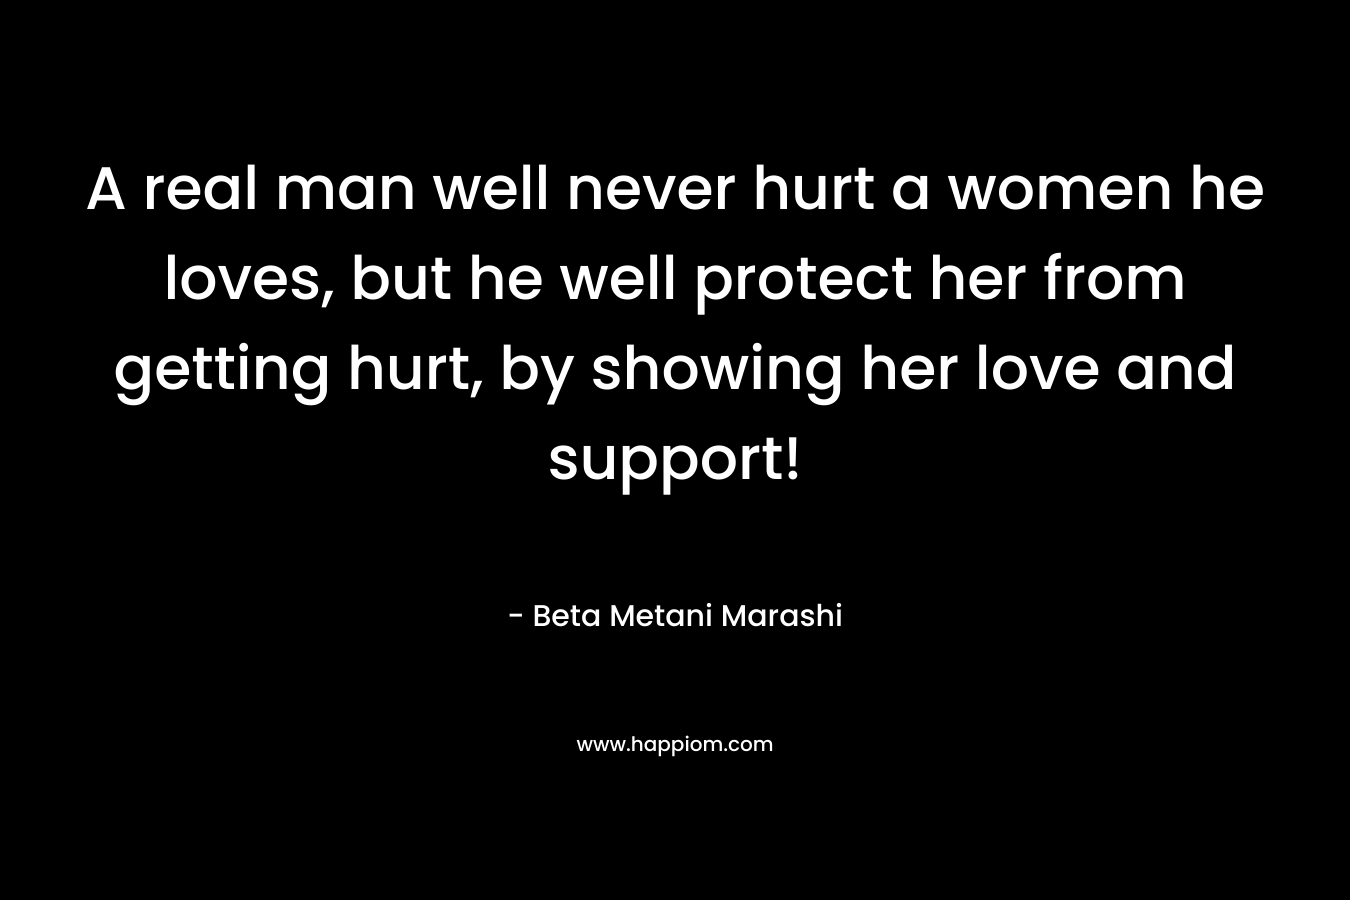 A real man well never hurt a women he loves, but he well protect her from getting hurt, by showing her love and support!